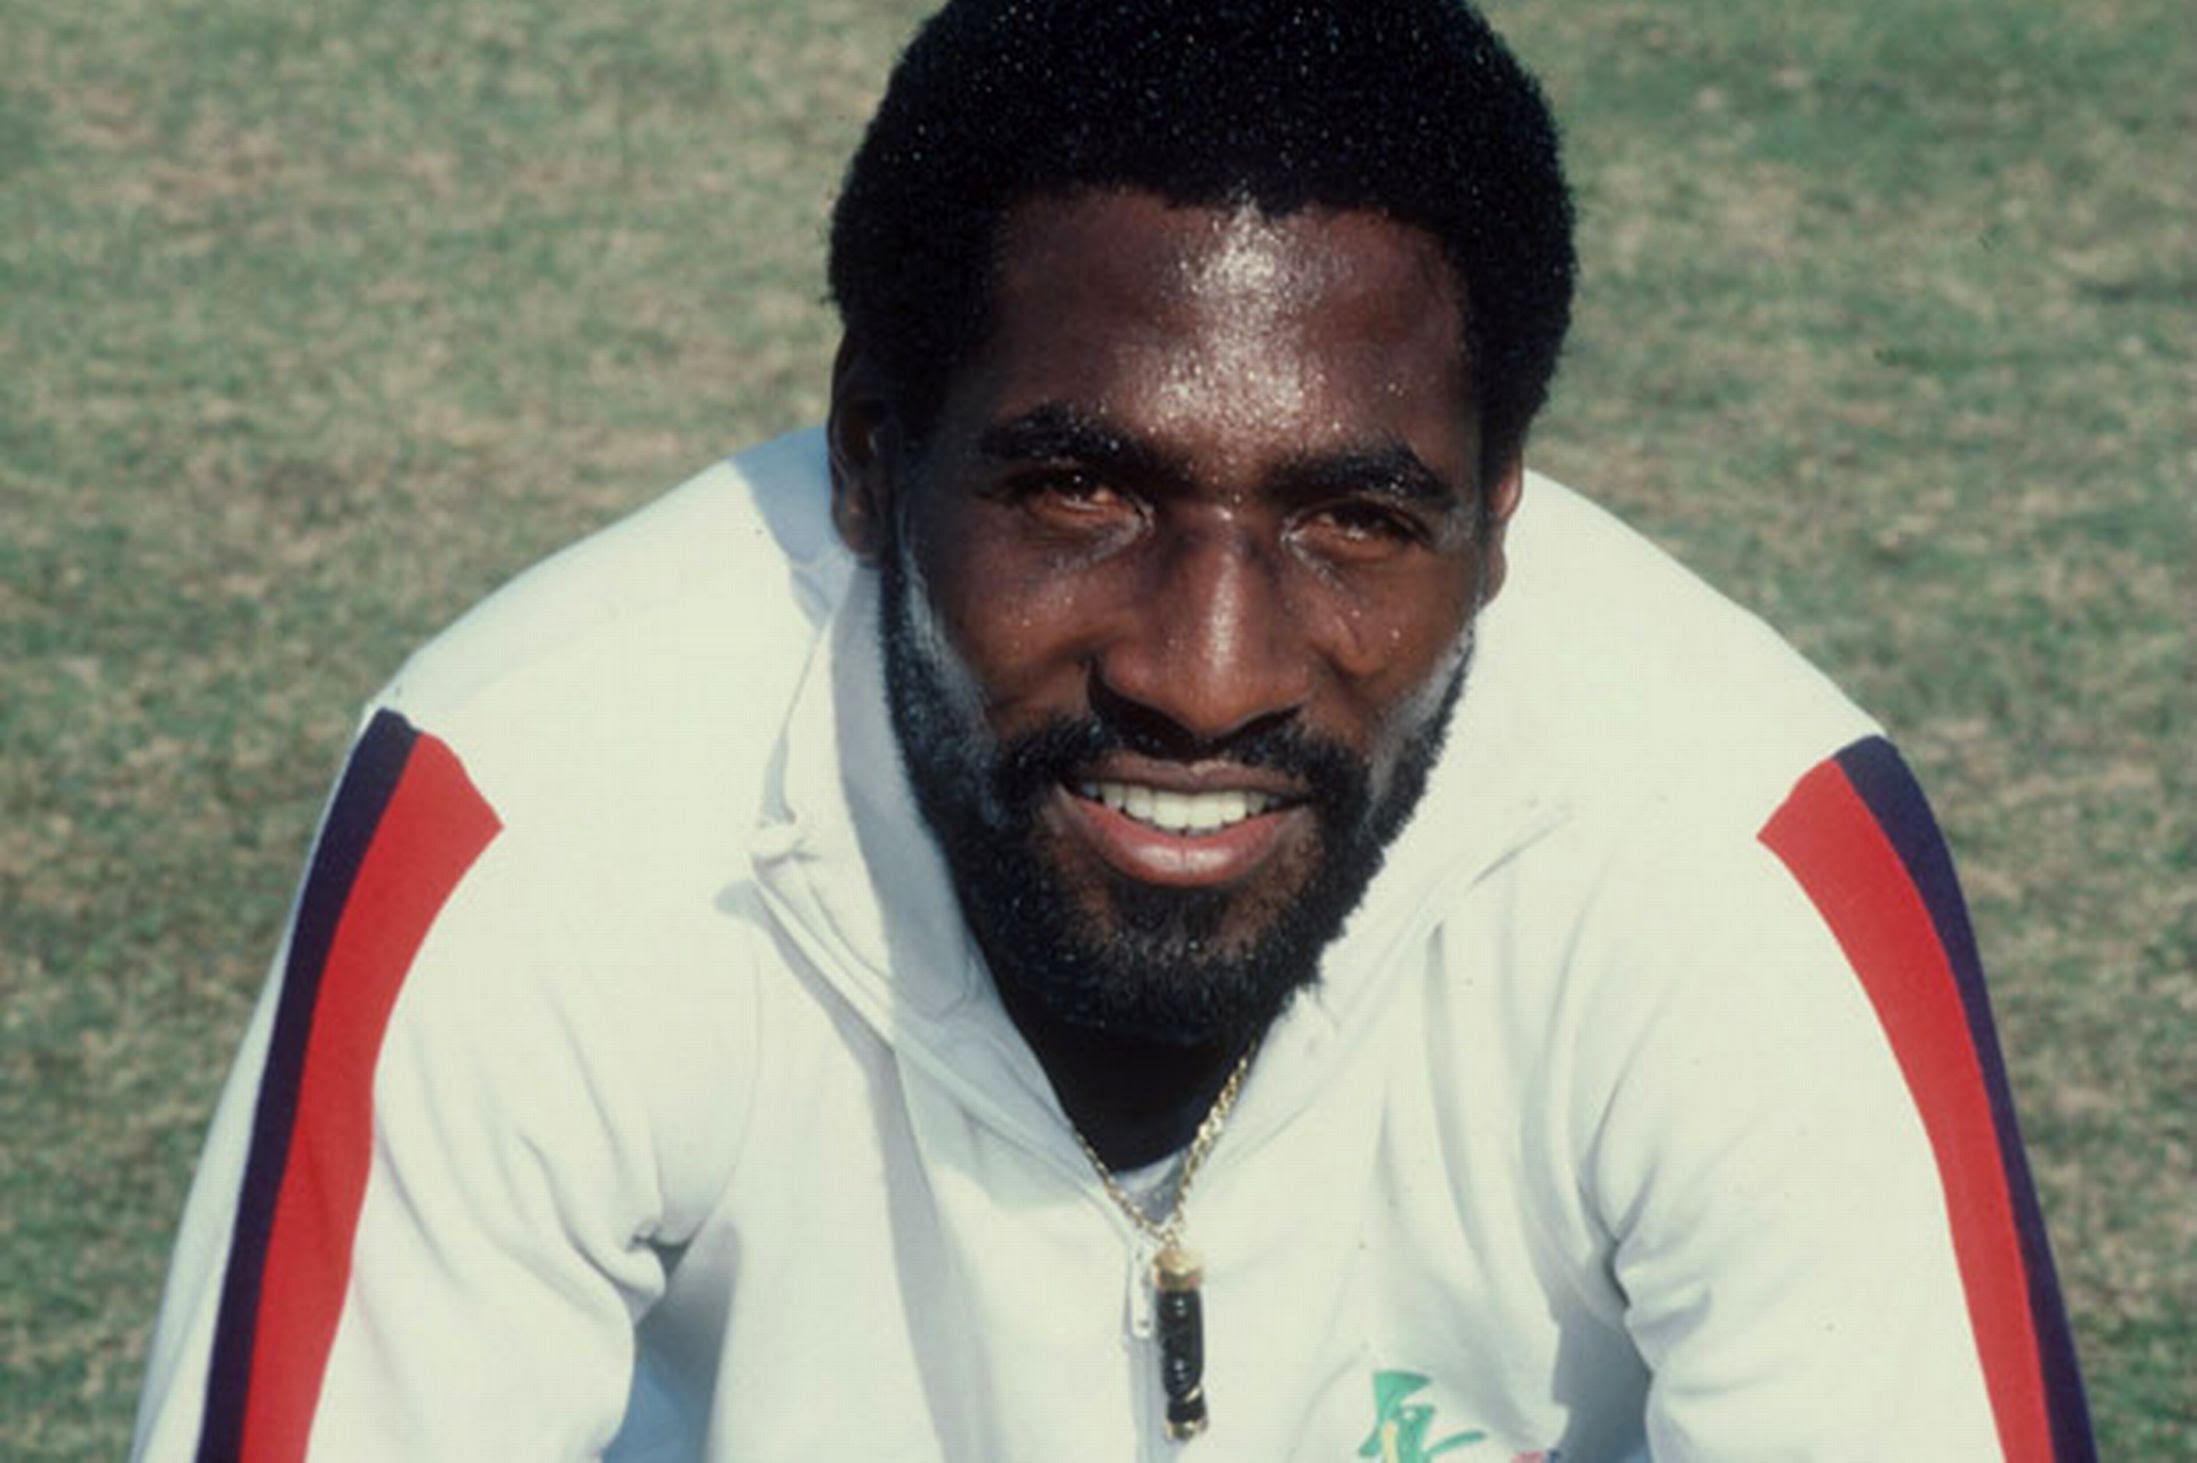 Vivian Richards entered into the footballing career in the year 1974